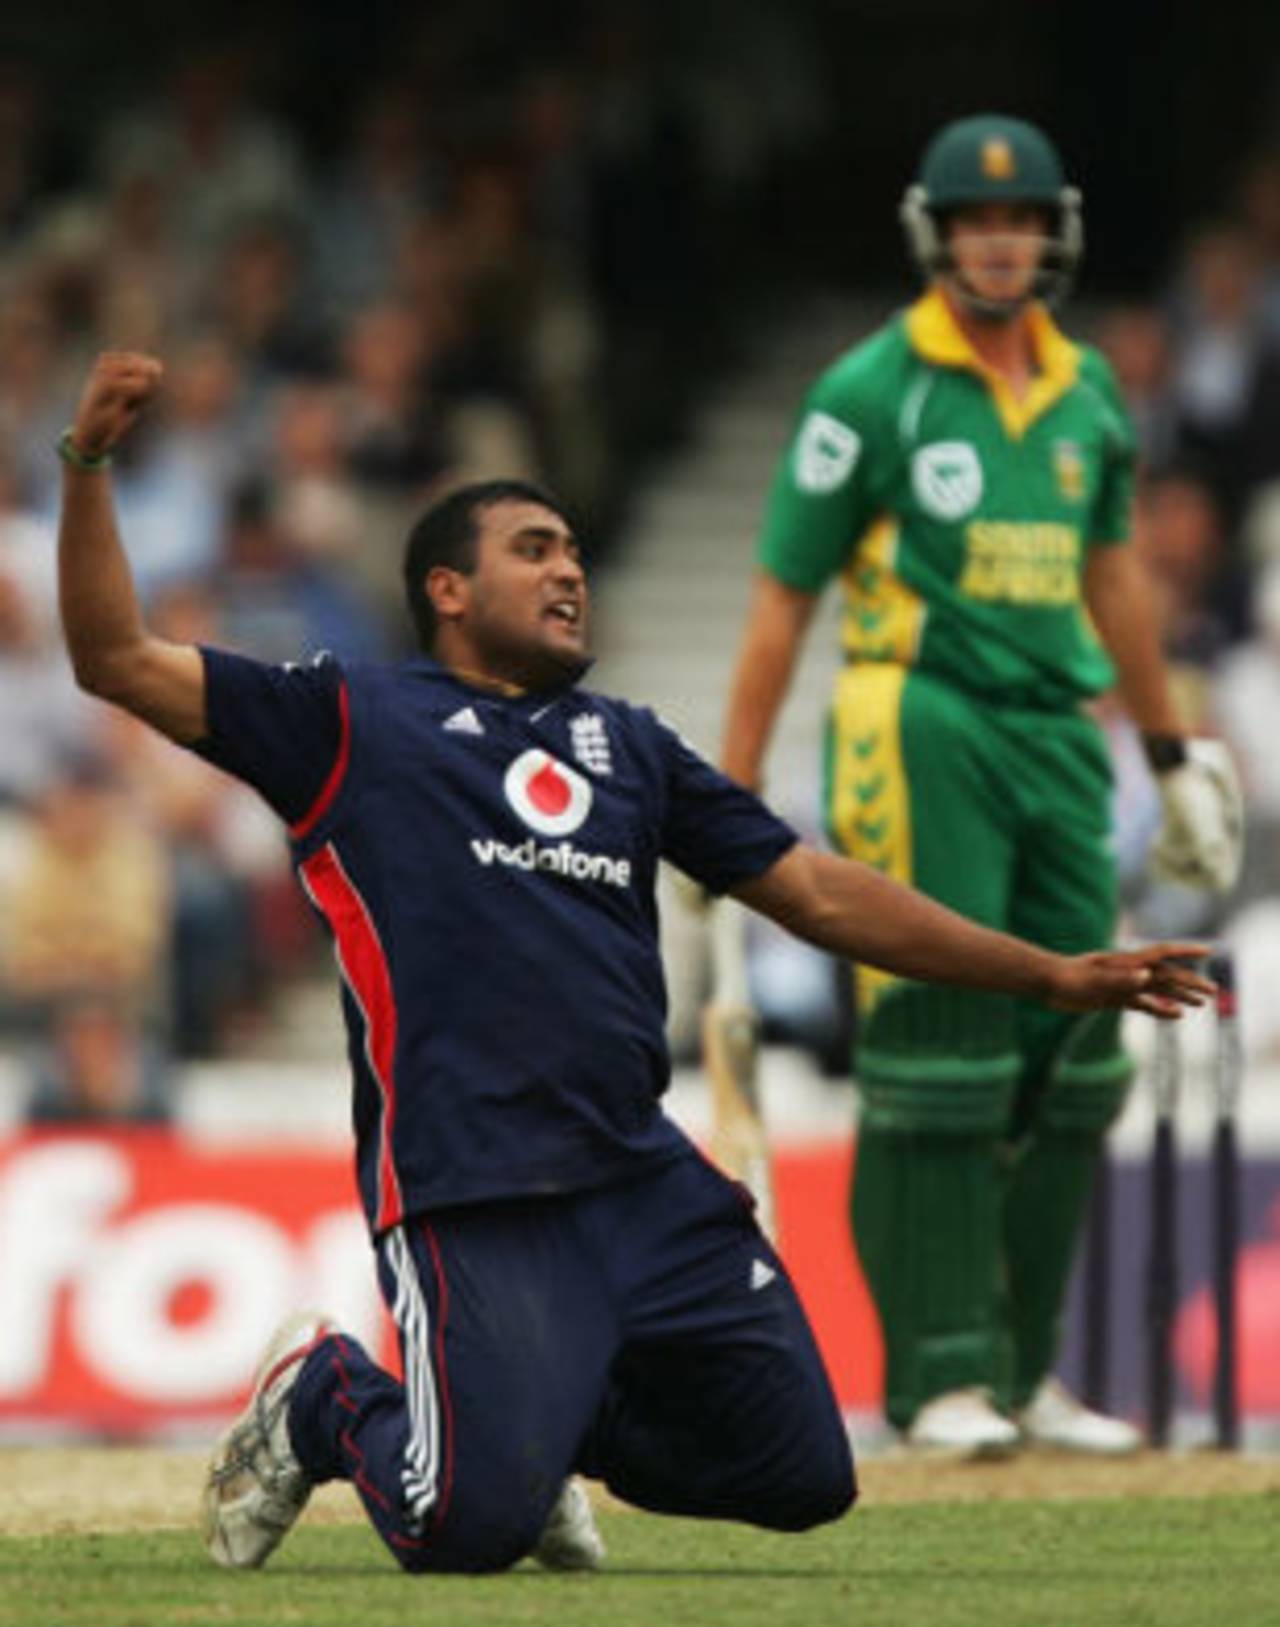 Samit Patel whoops with delight after swooping to catch Albie Morkel off his own bowling, England v South Africa, 3rd ODI, The Oval, August 29, 2008